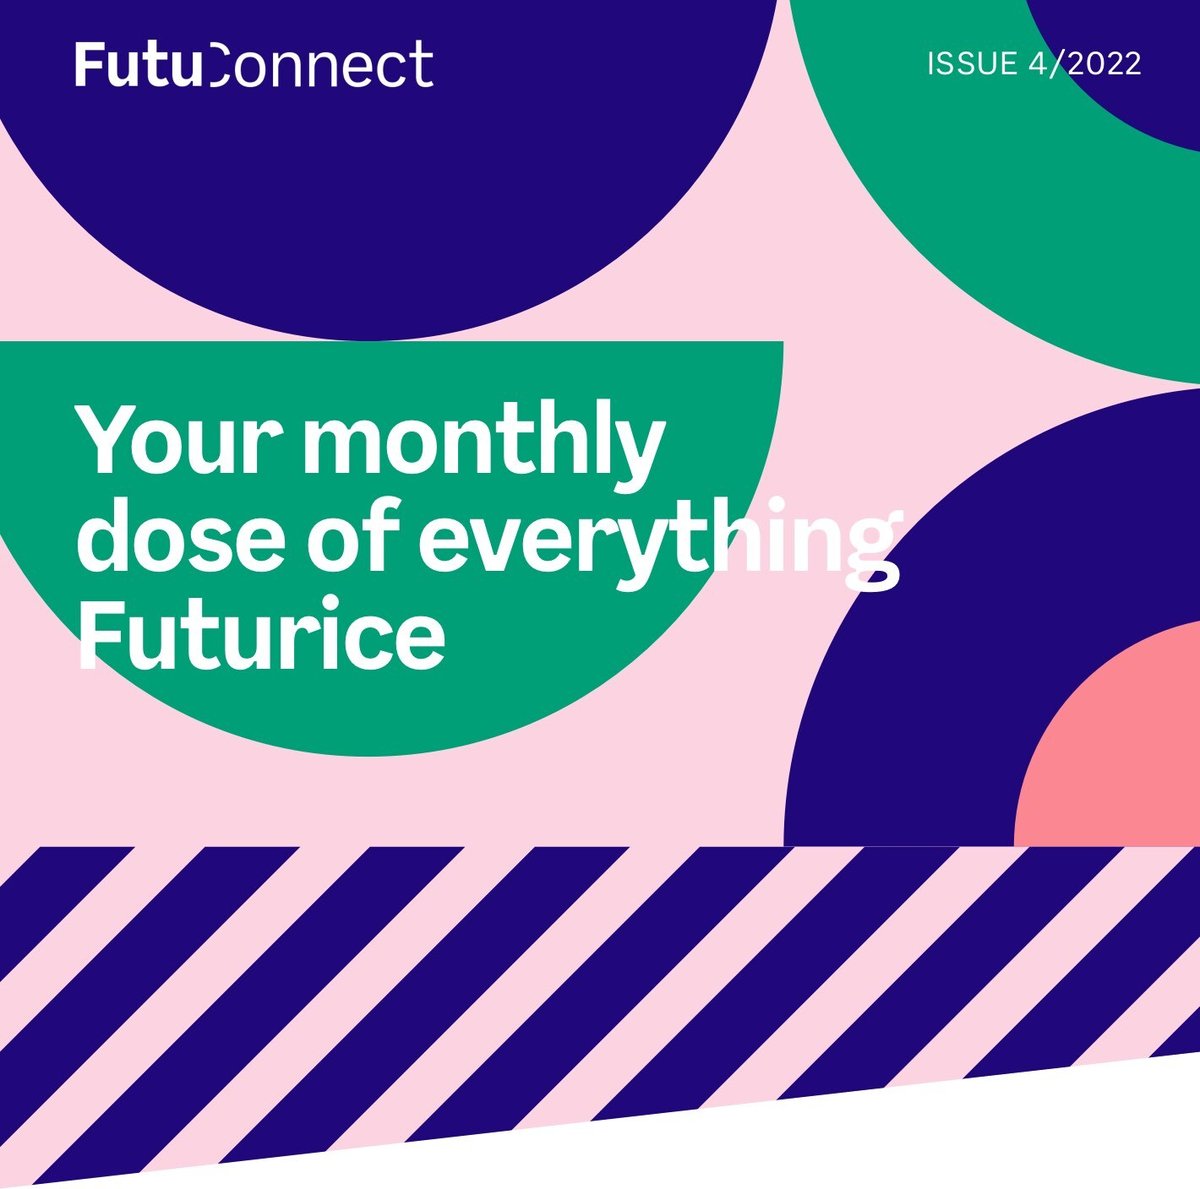 FutuConnect Newsletter Issue 4/2022